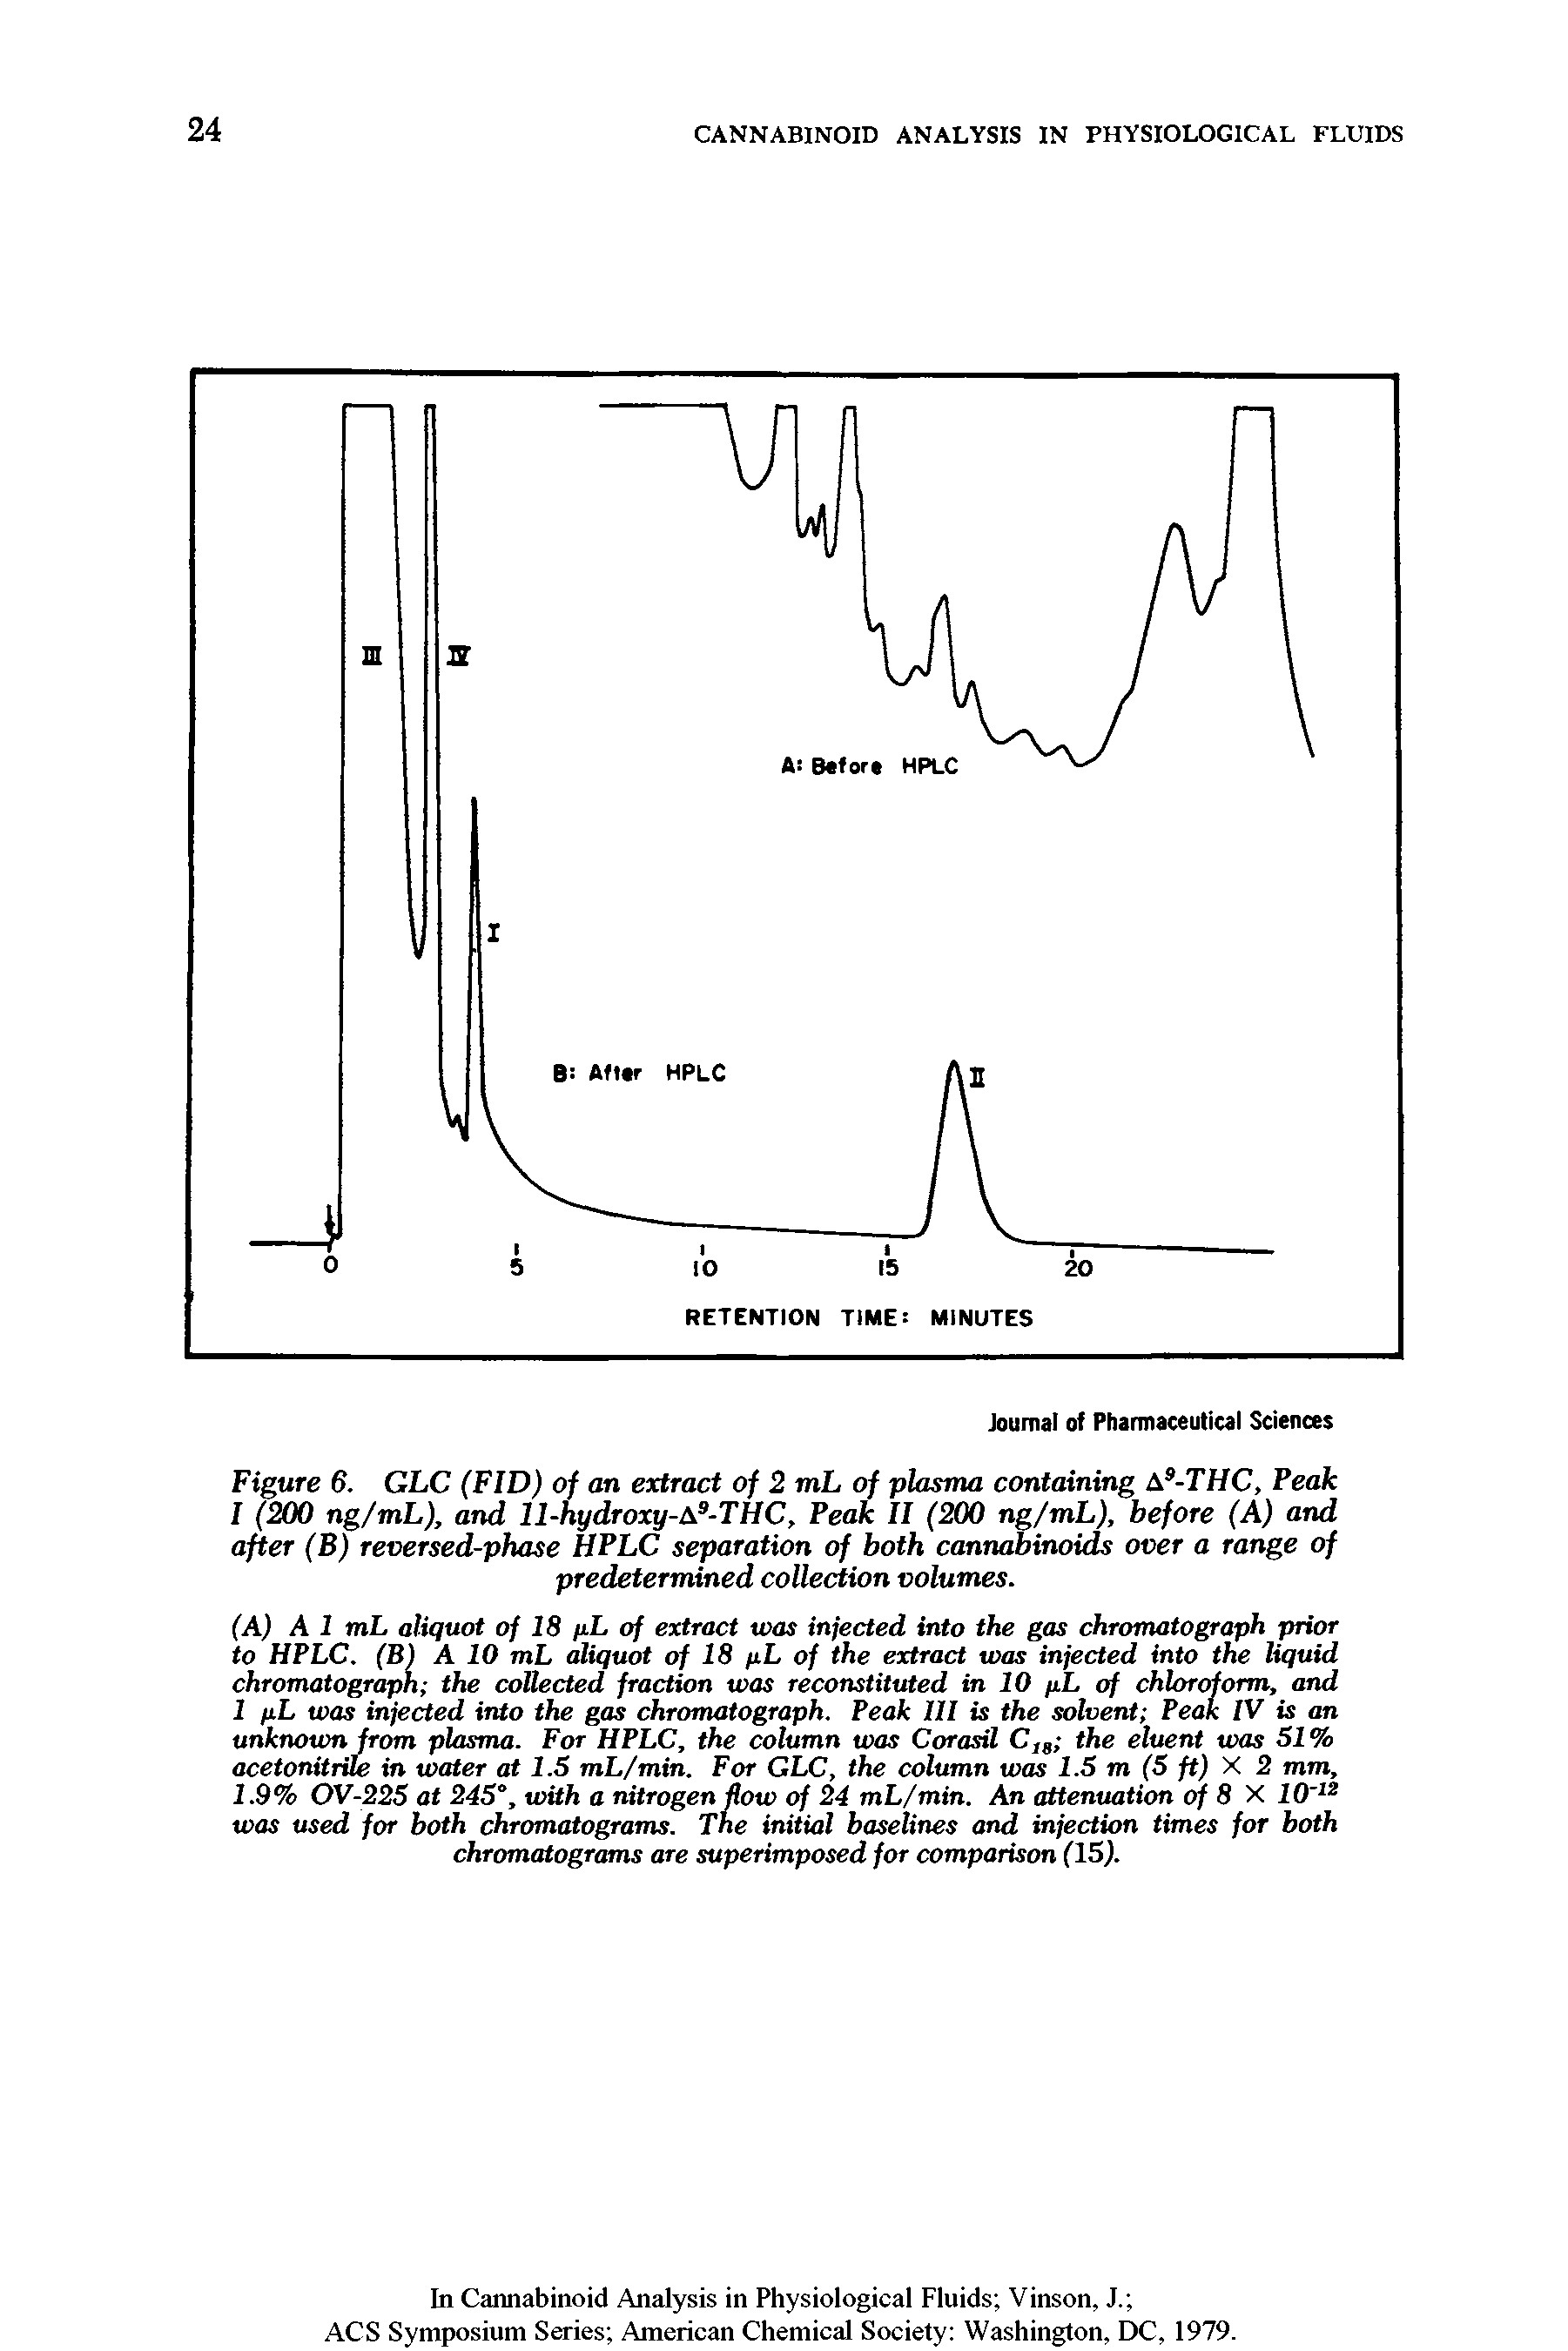 Figure 6. GLC (FID) of an extract of 2 mL of plasma containing A9-THC, Peak I (200 ng/mL), and ll-hydroxy-A9-THC, Peak II (200 ng/mL), before (A) and after (B) reversed-phase HPLC separation of both cannabinoids over a range of predetermined collection volumes.